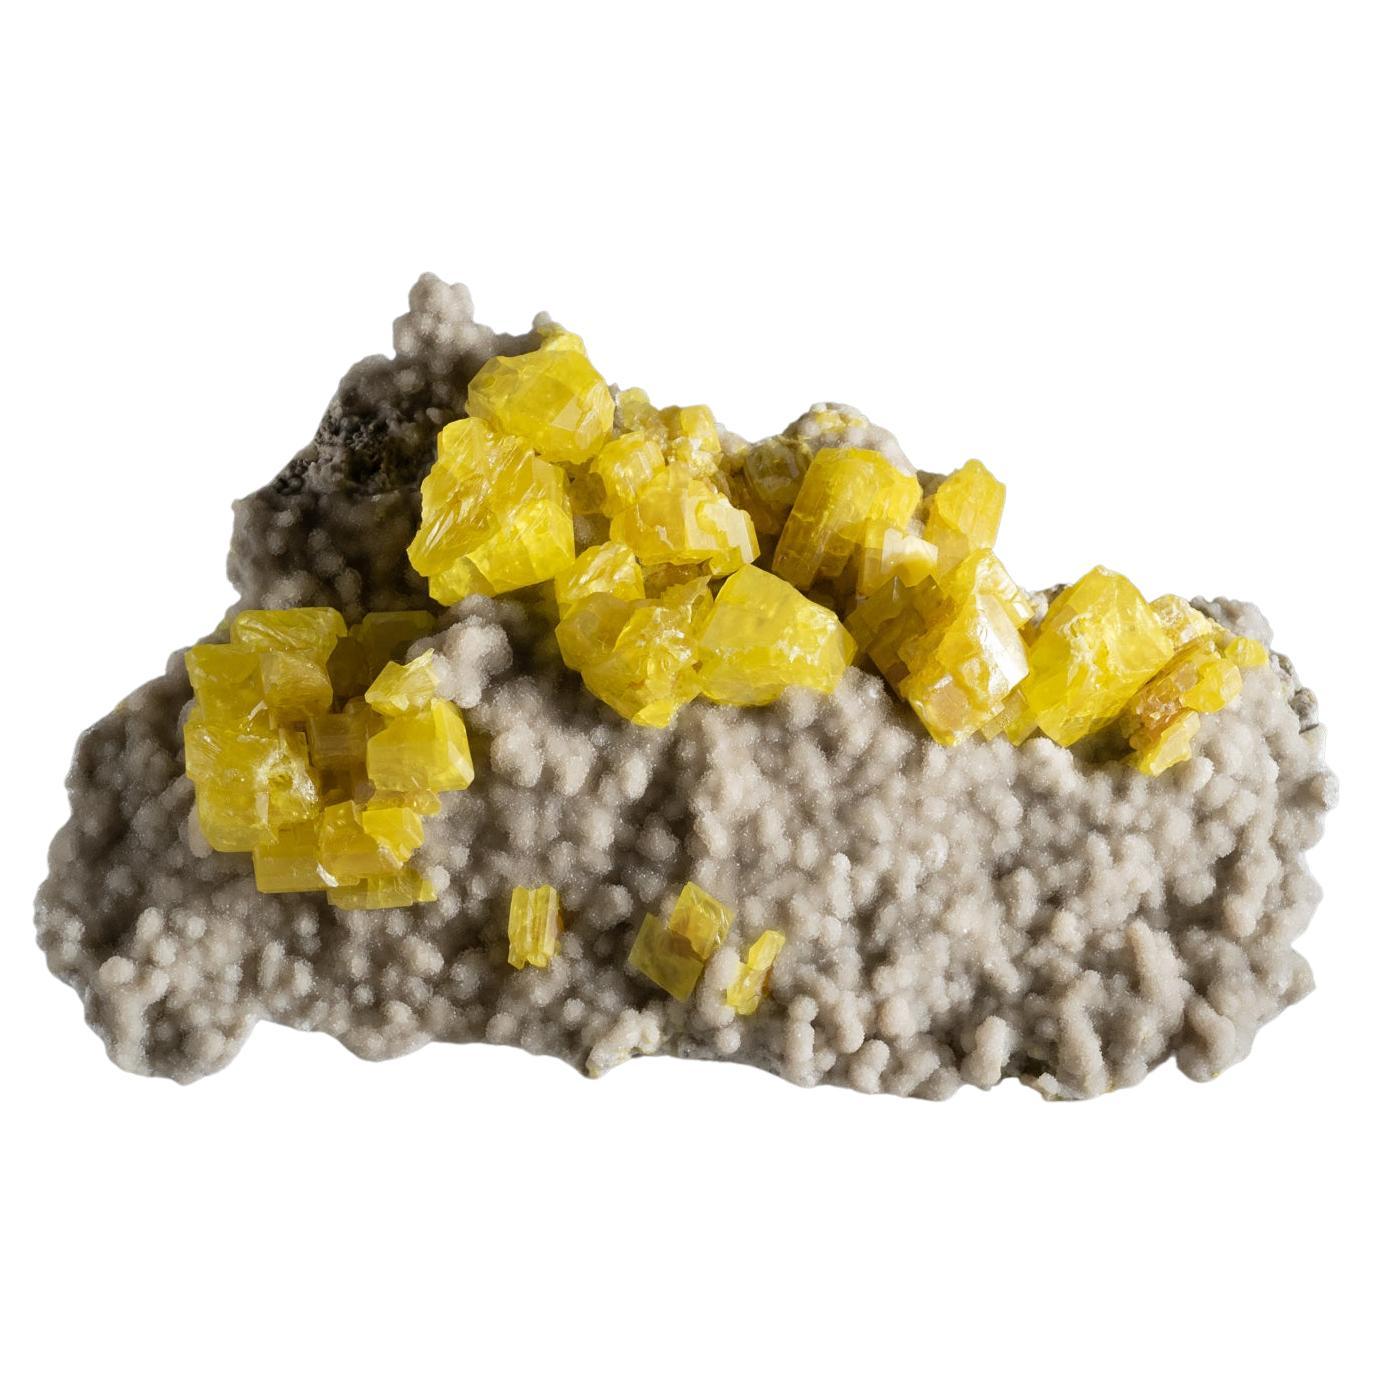 Sulfur on Aragonite Mineral from Agrigento Province, Sicily, Italy For Sale